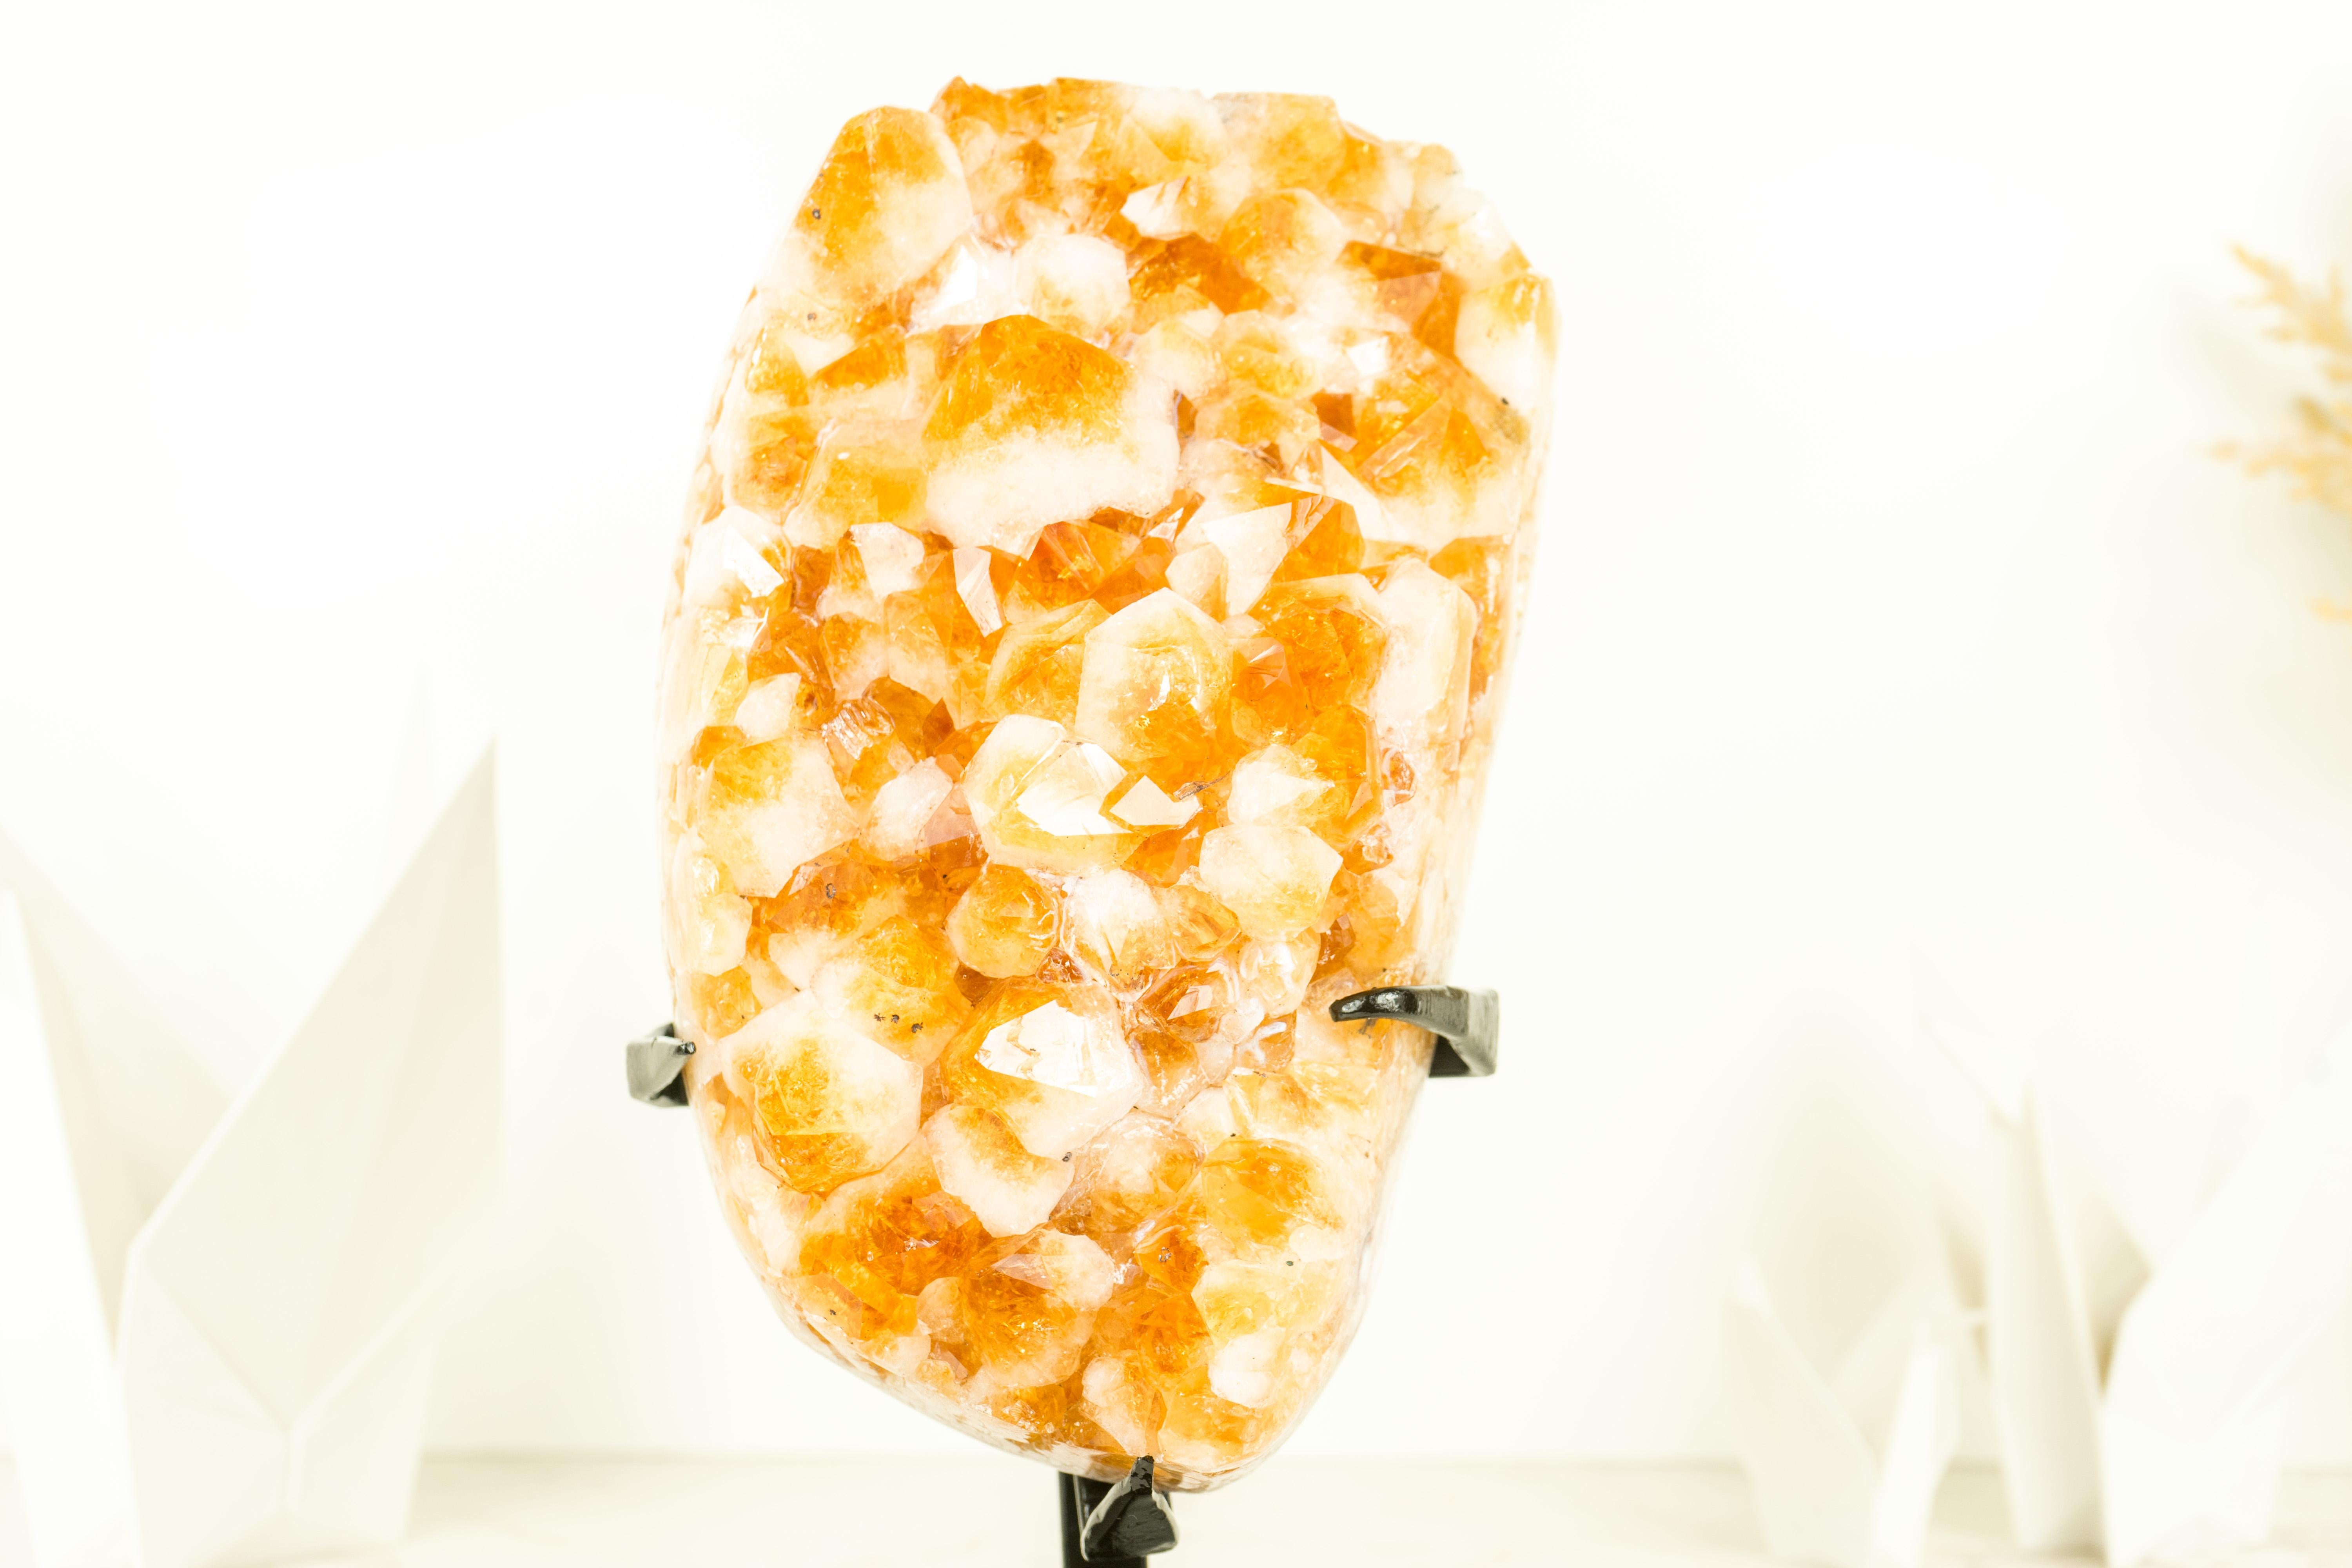 With beautiful aesthetic formations, fabulous colors, and high-grade Citrine Druzy, this specimen is ready to become the perfect addition to your crystal collection, a centerpiece in your home decor, or a powerful energetic tool for your healing